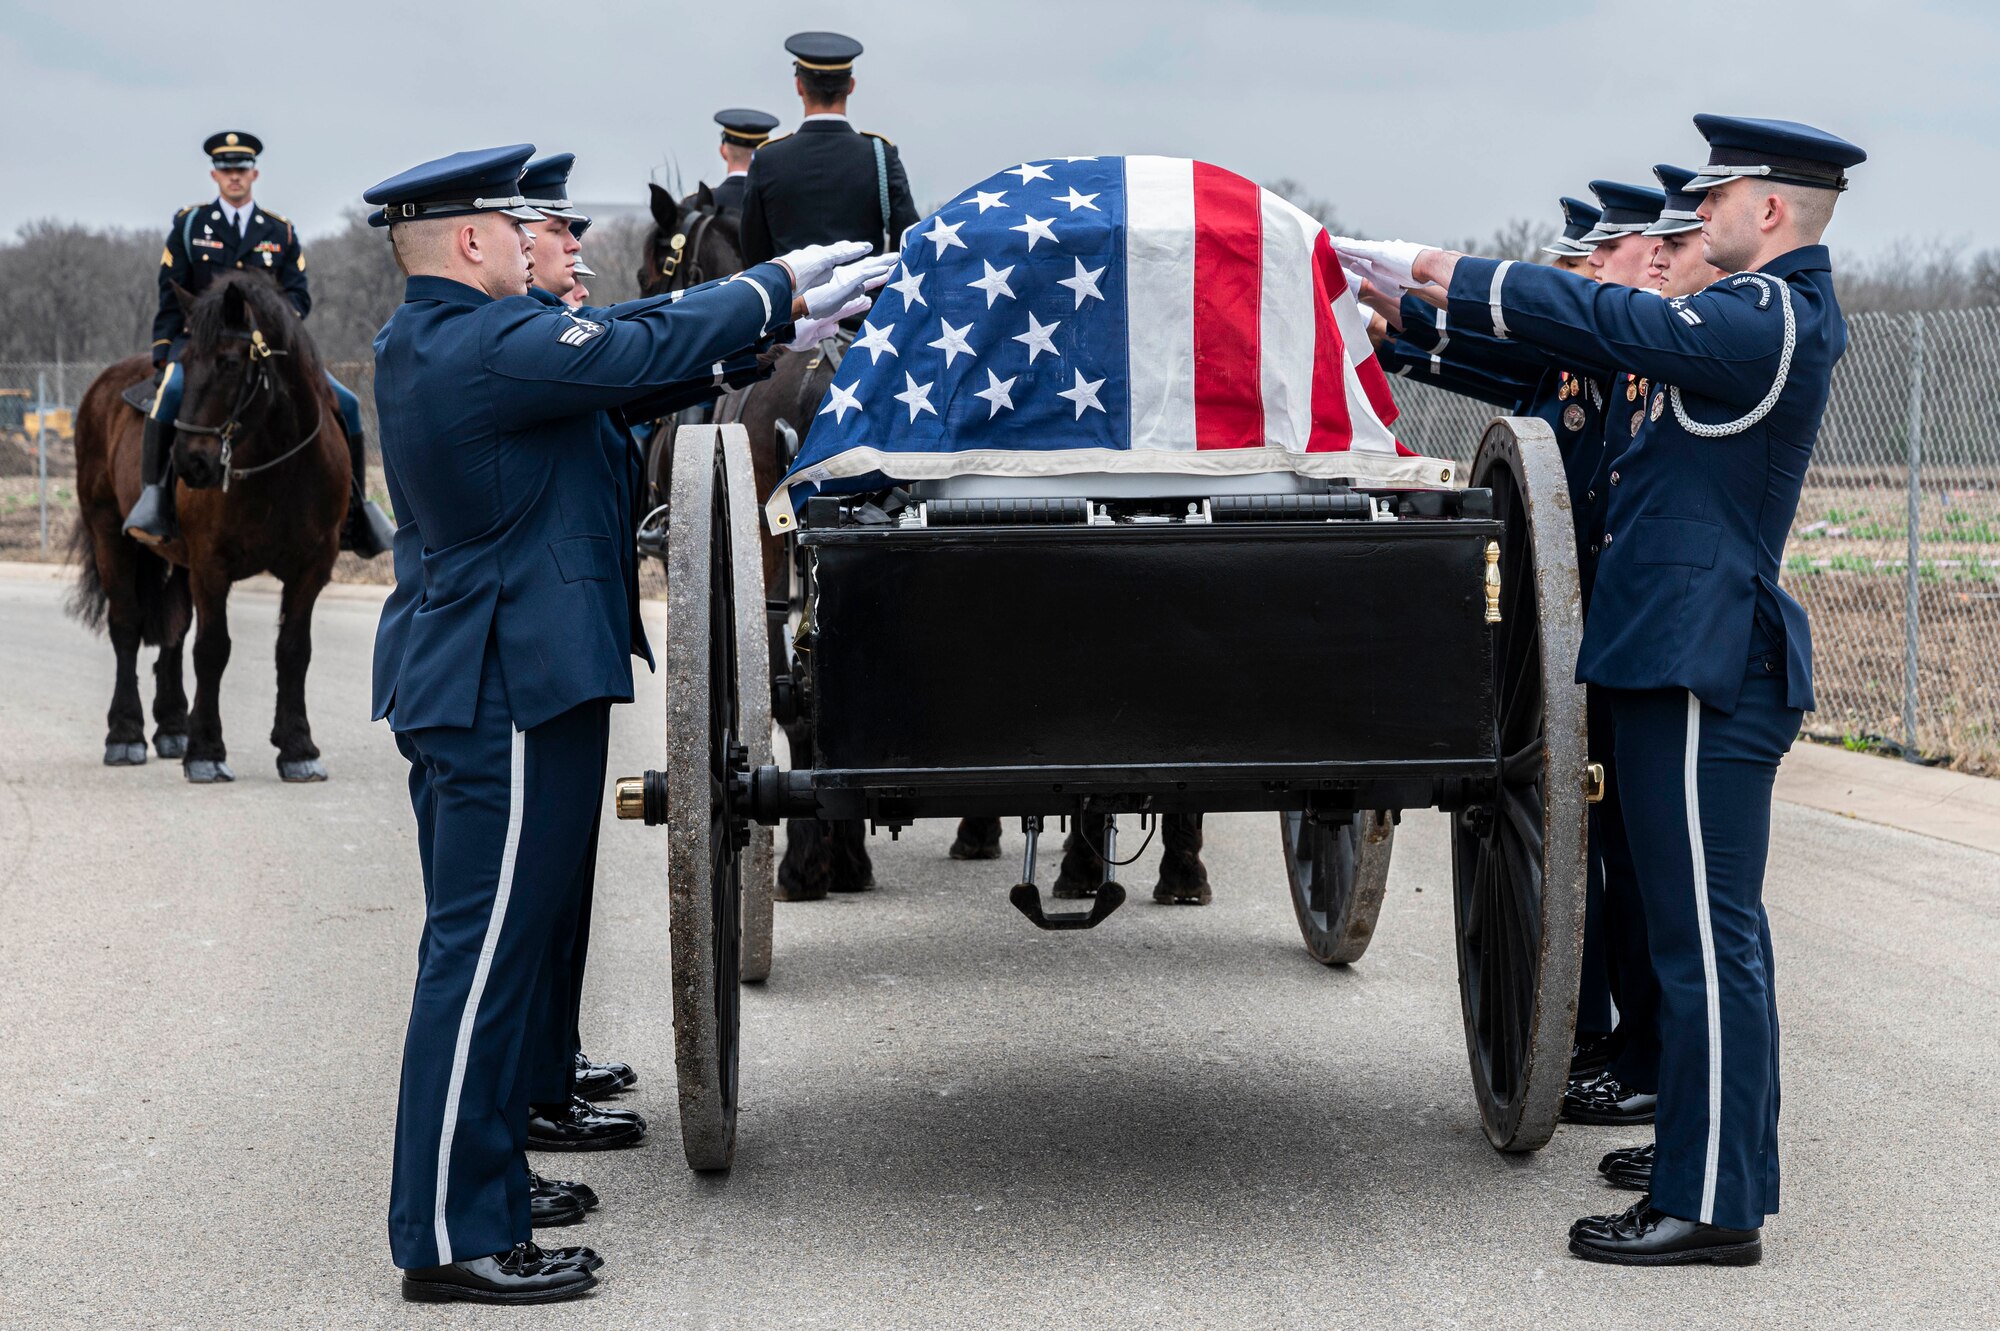 Soldiers with the Fort Sam Houston Caisson Section carry the flag-draped casket of the fifth Chief Master Sgt. of the Air Force Robert D. Gaylor during his interment ceremony, Feb. 10, 2024 at Fort Sam Houston National Cemetery, Texas. Gaylor spent more than seven decades improving the Air Force through its people. He was an active proponent of professional military education and delivered seminars frequently in person and online until his passing. (U.S. Air Force photo by Tristin English).